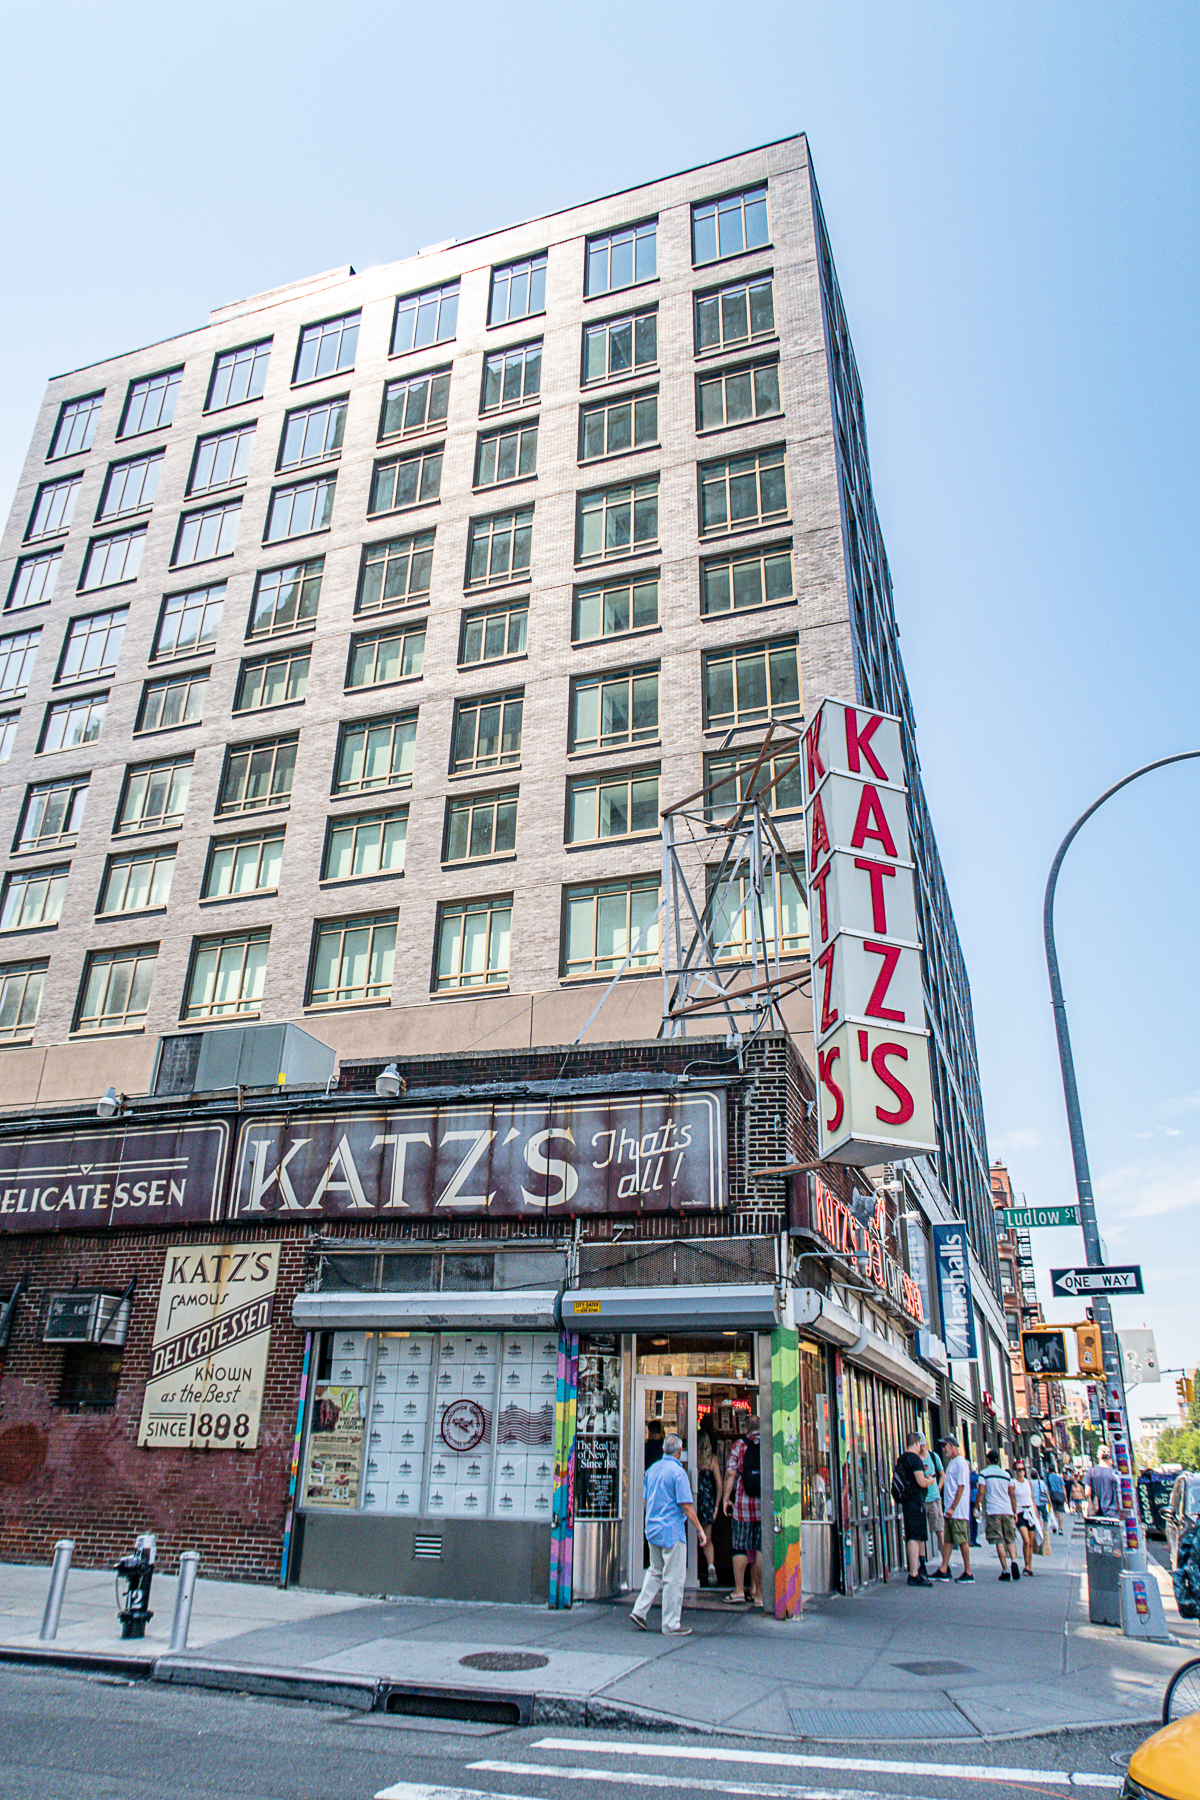 What to do in the Lower East Side